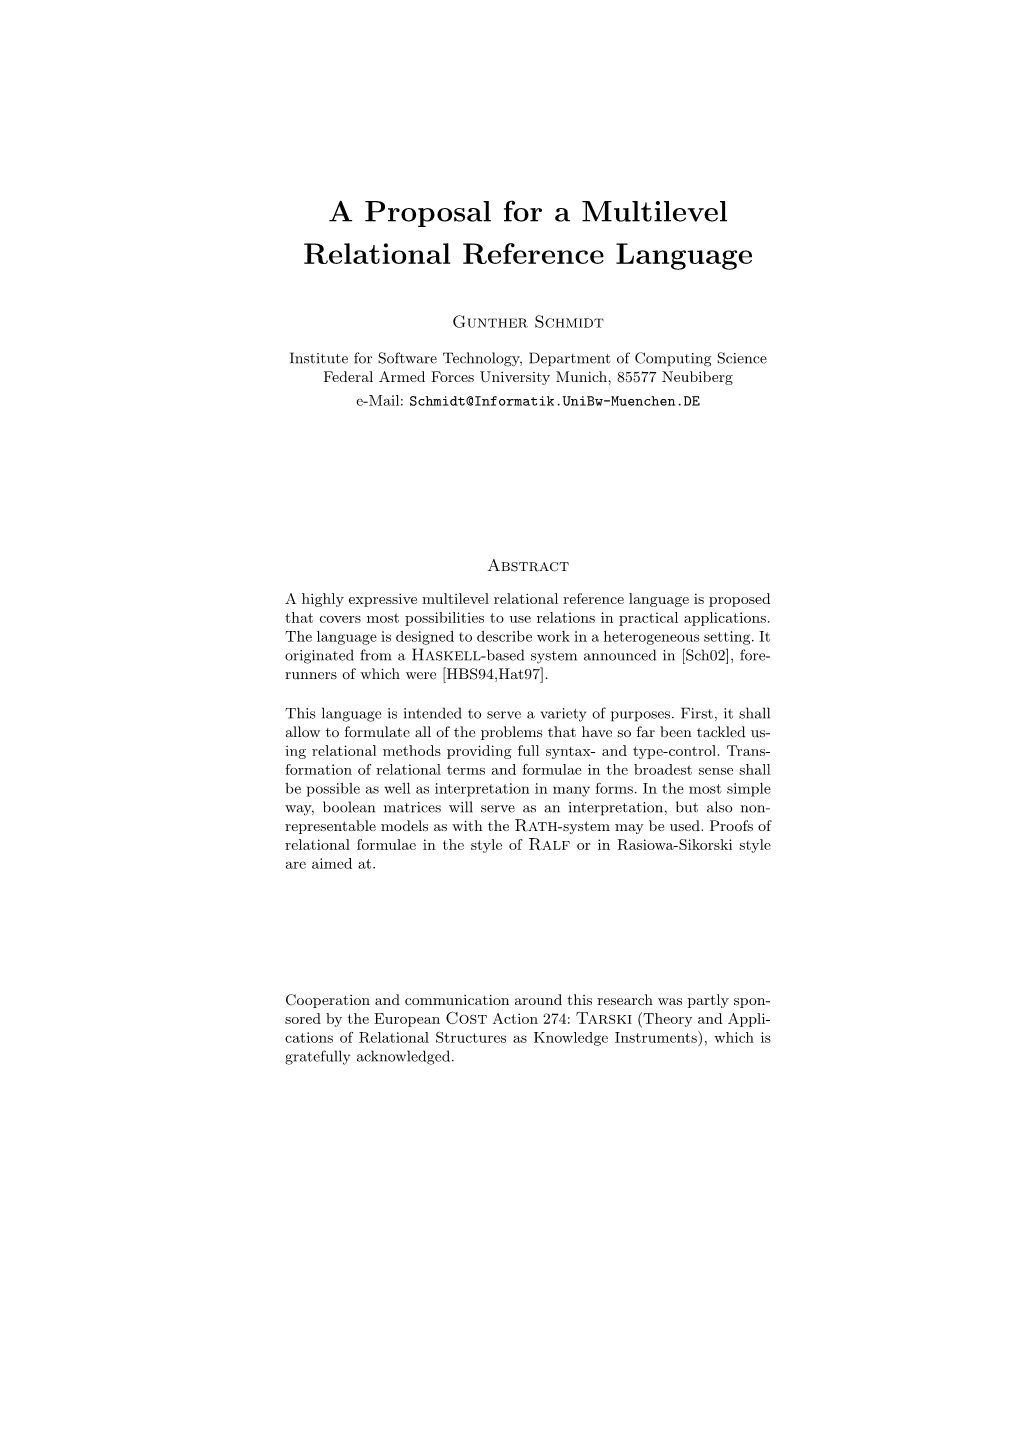 A Proposal for a Multilevel Relational Reference Language